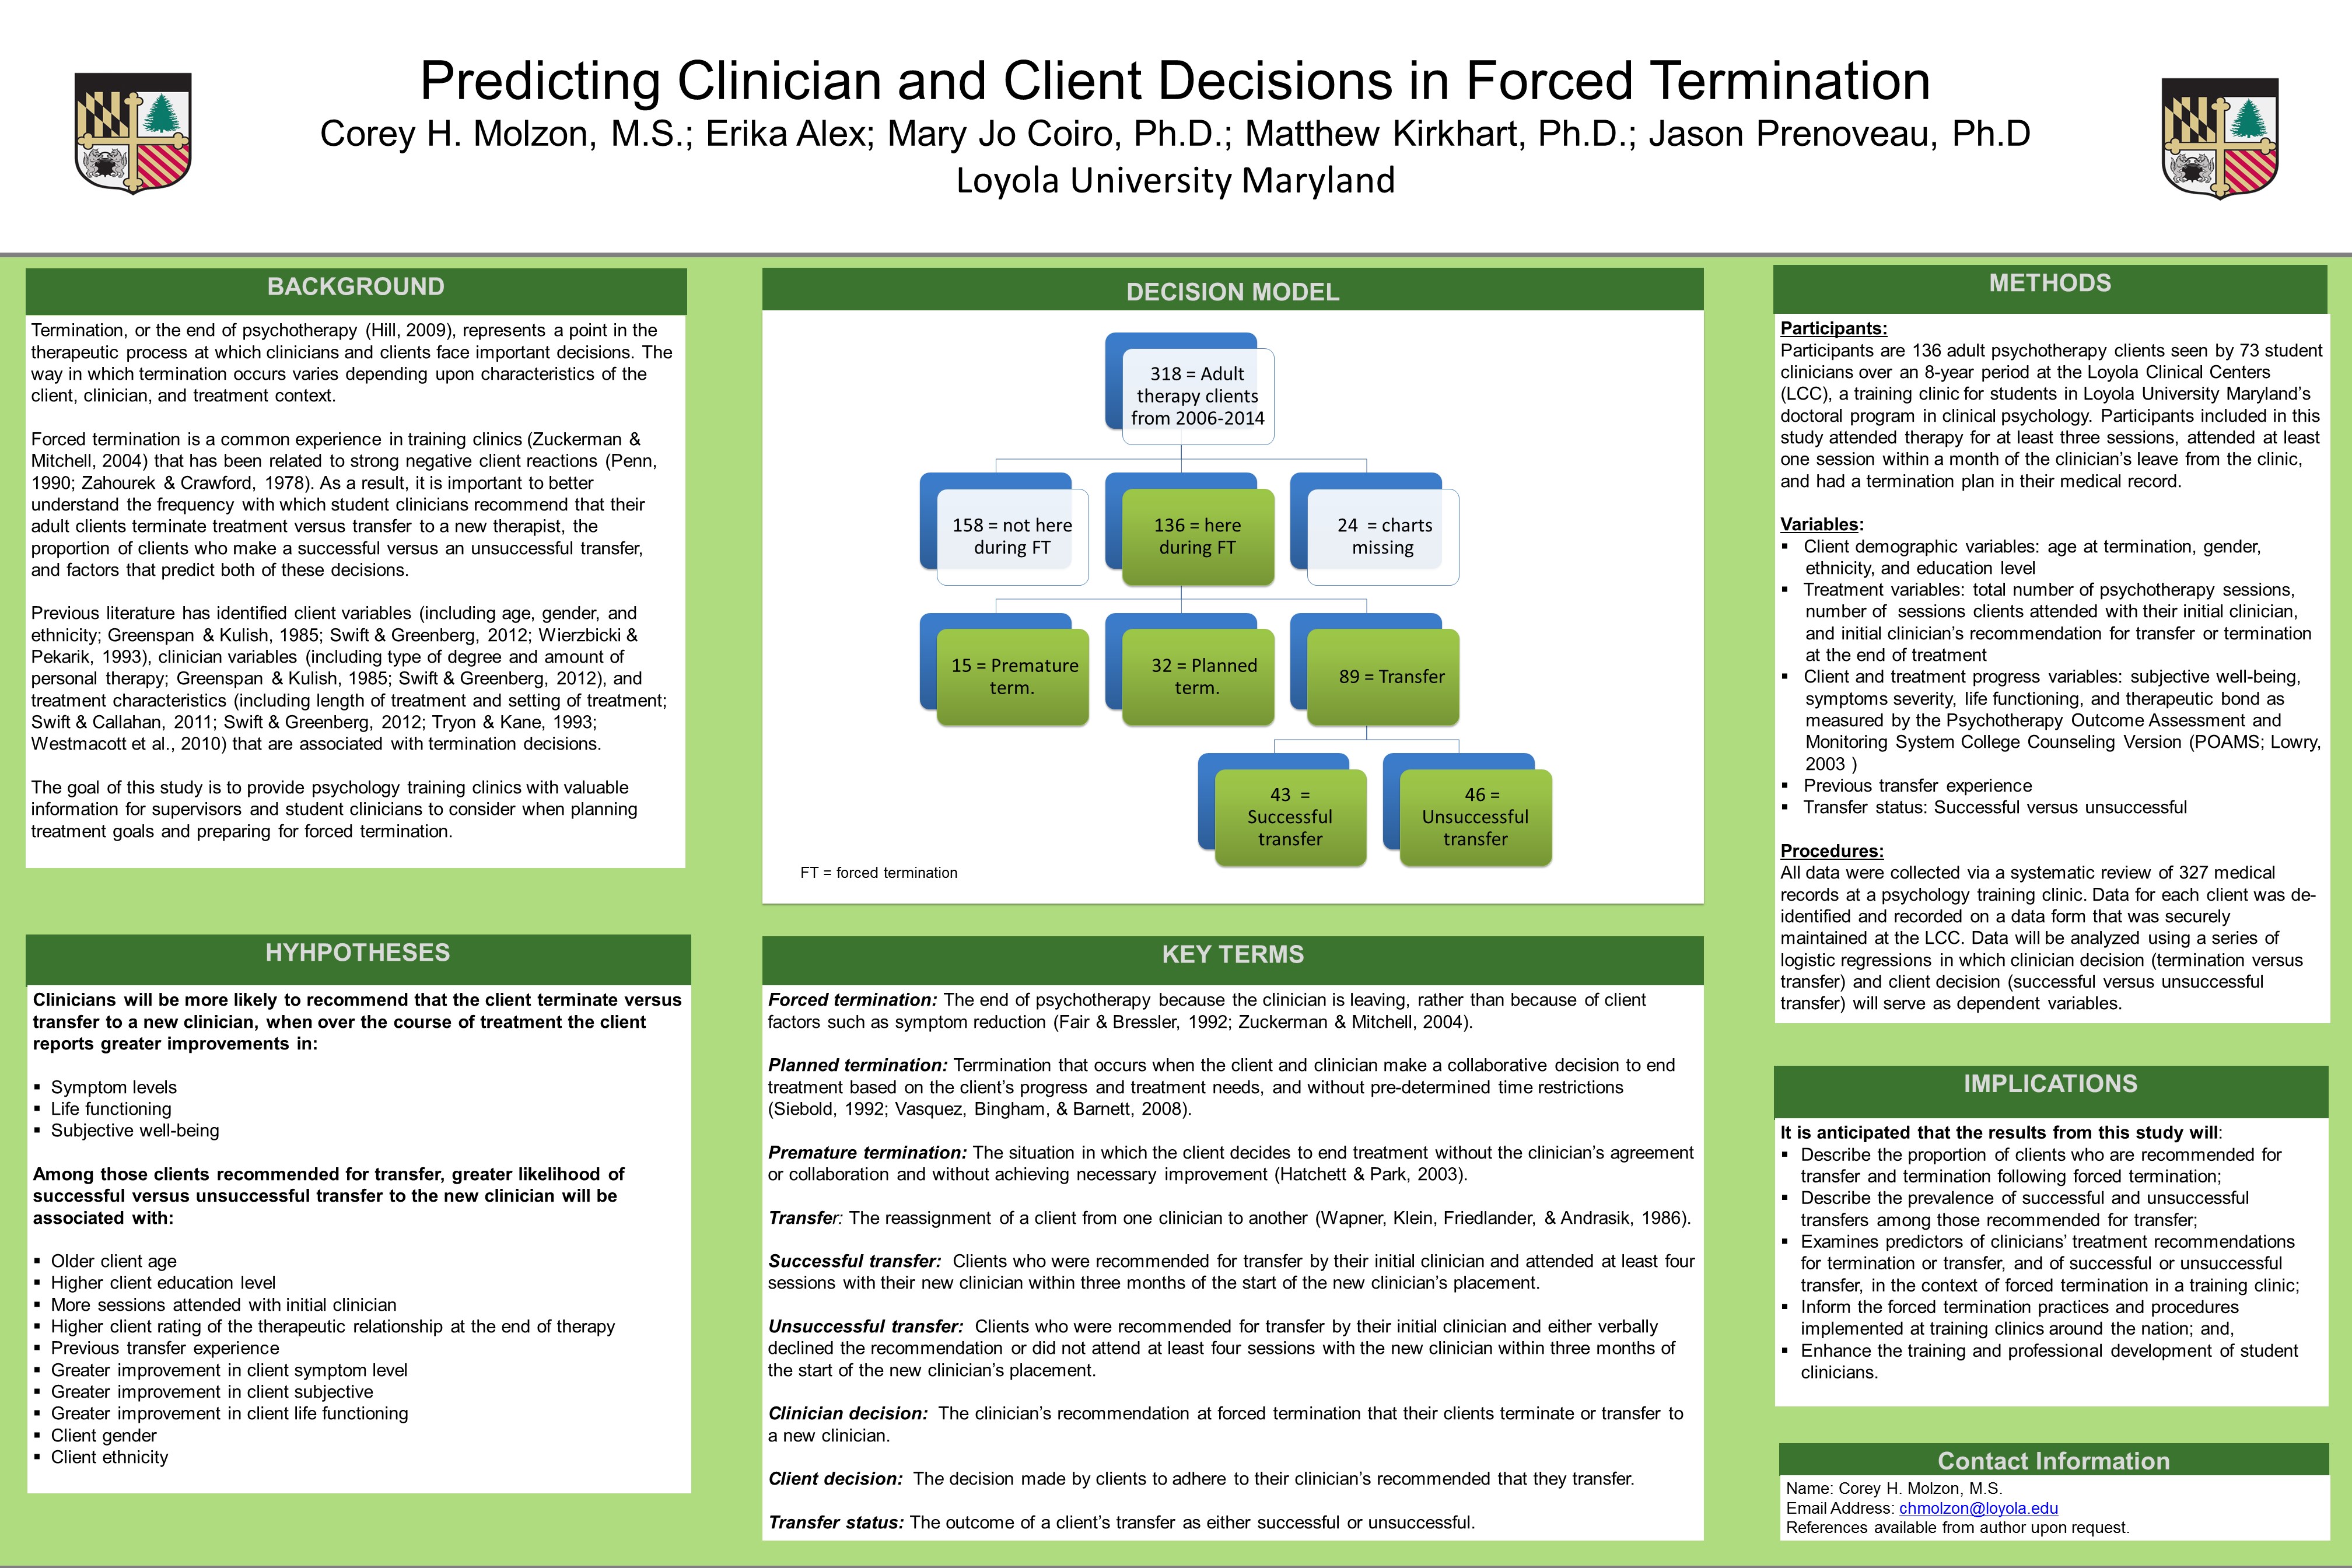 poster image: Predicting Clinician and Client Decisions in Forced Termination